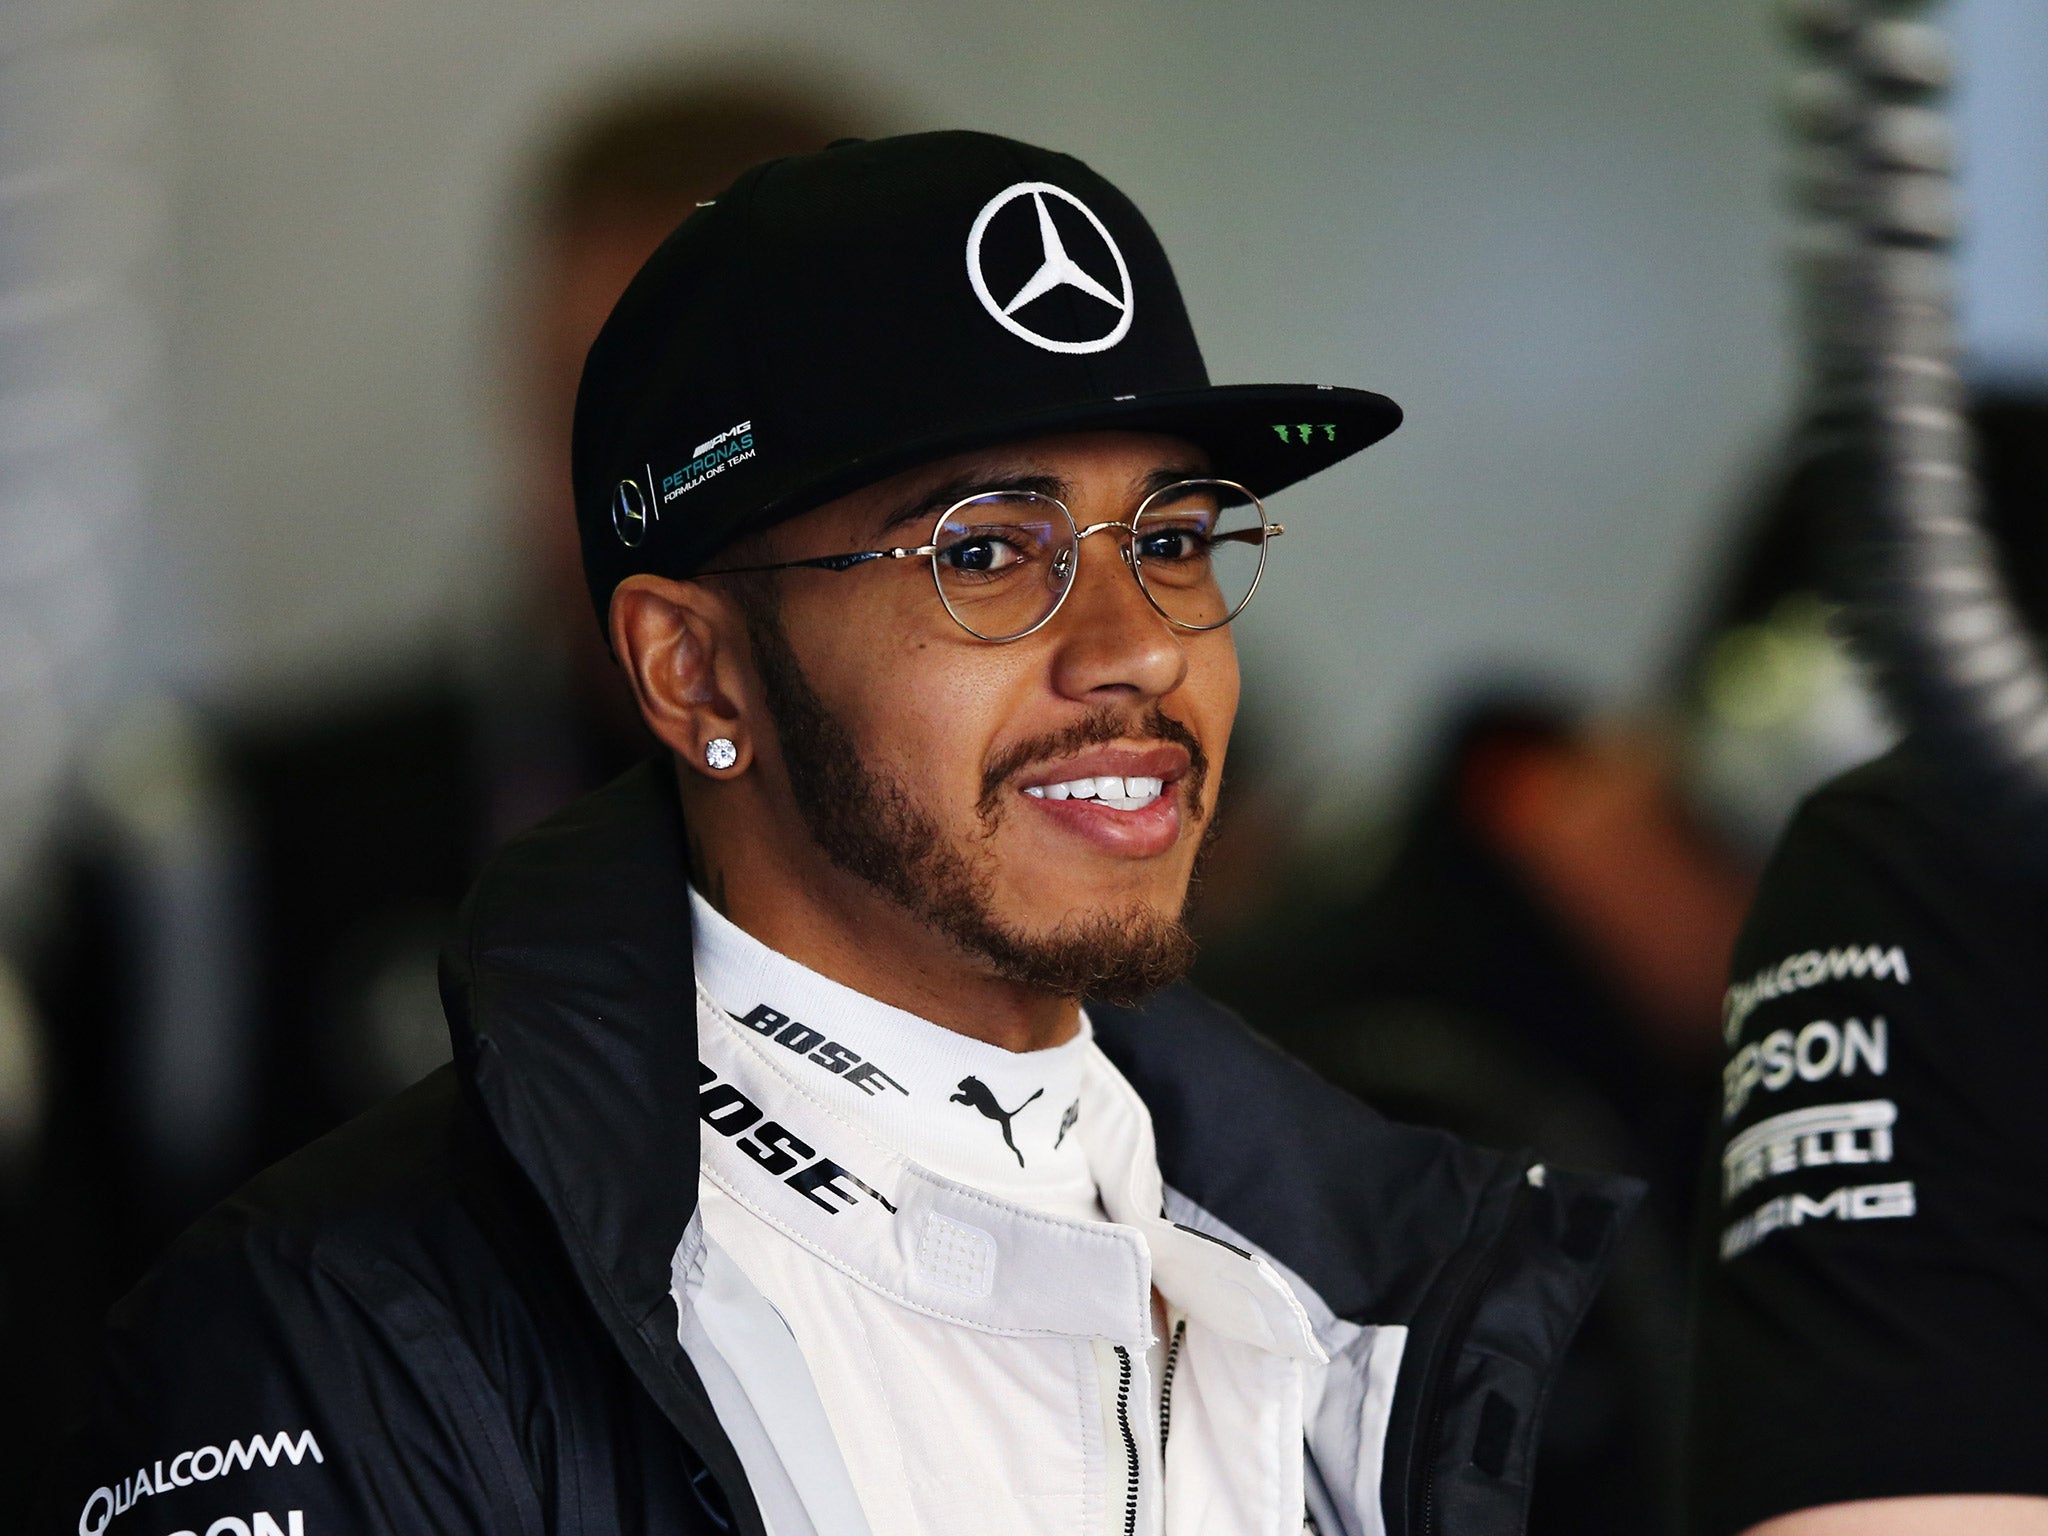 Sir Jackie Stewart believes Lewis Hamilton should apologise for taking a Snapchat video while riding a motorbike in New Zealand